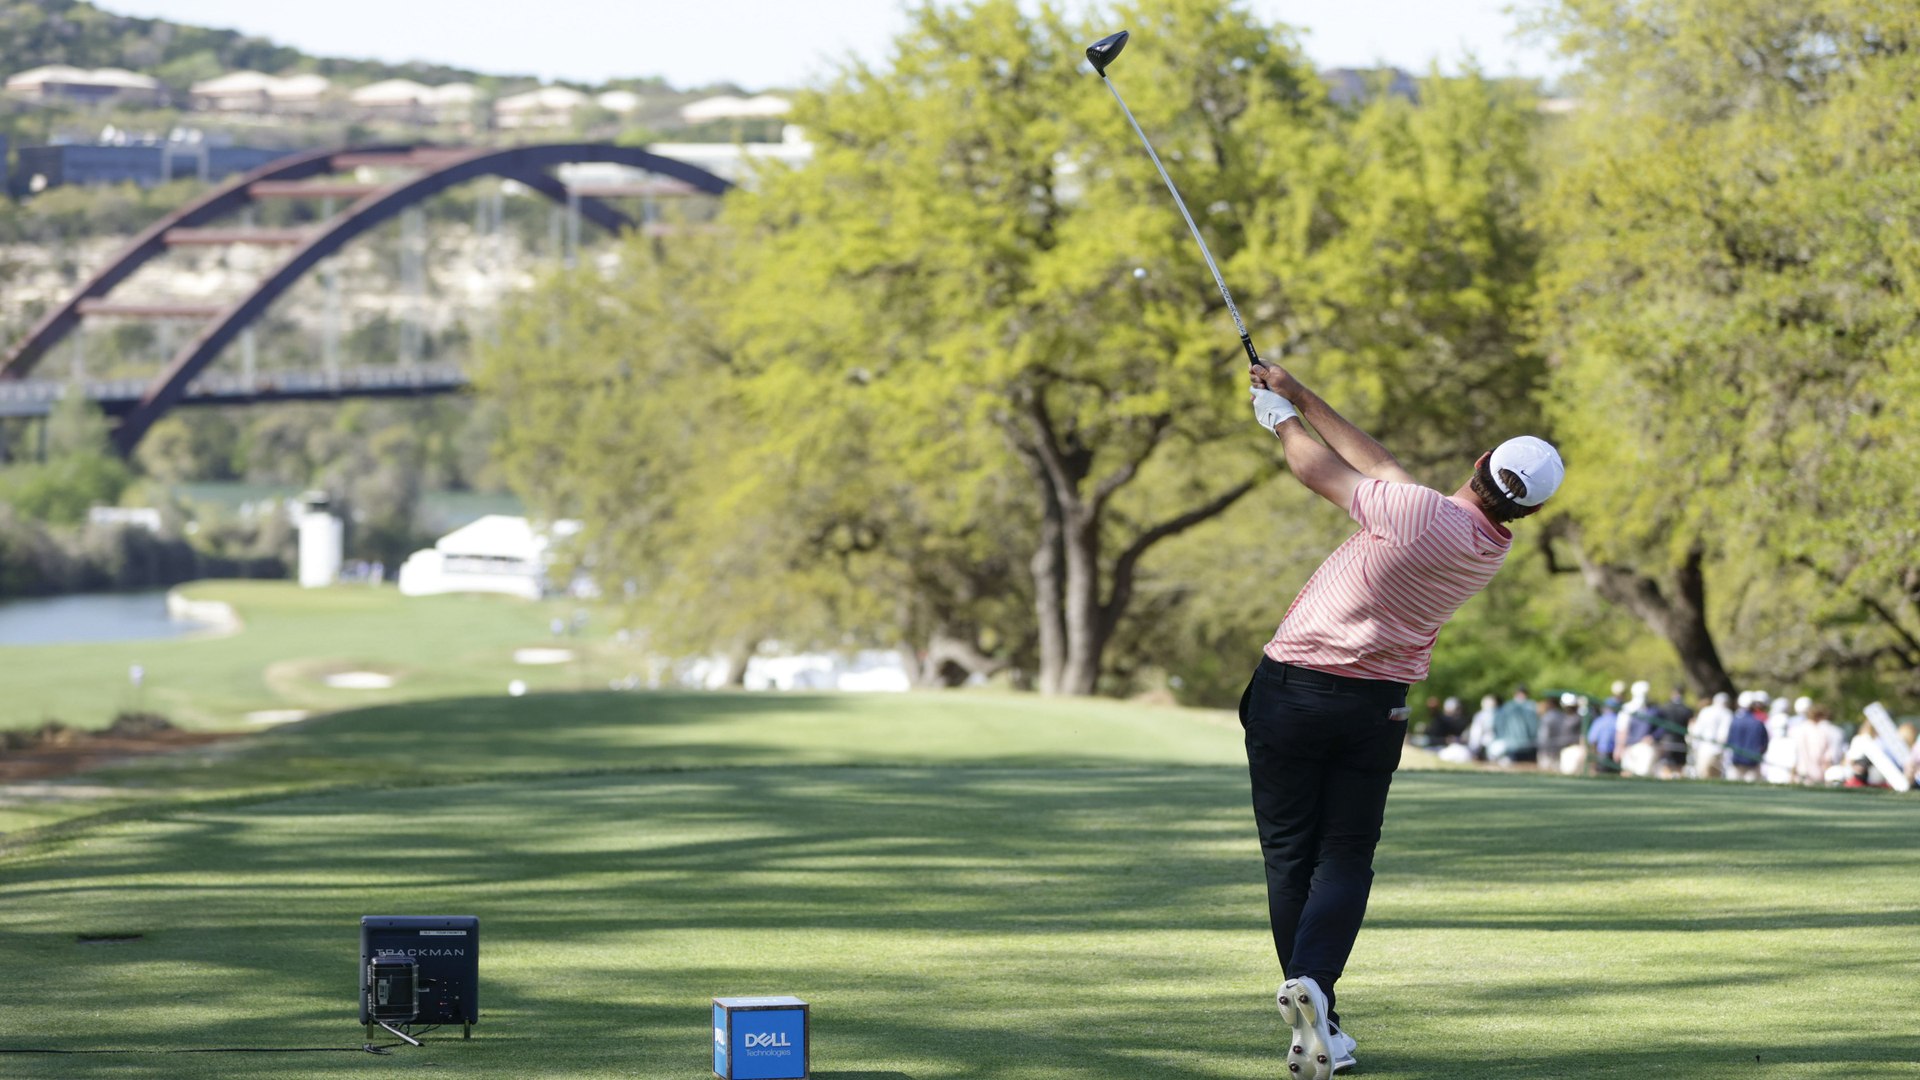 WGC Dell Match Course: Austin Country Club